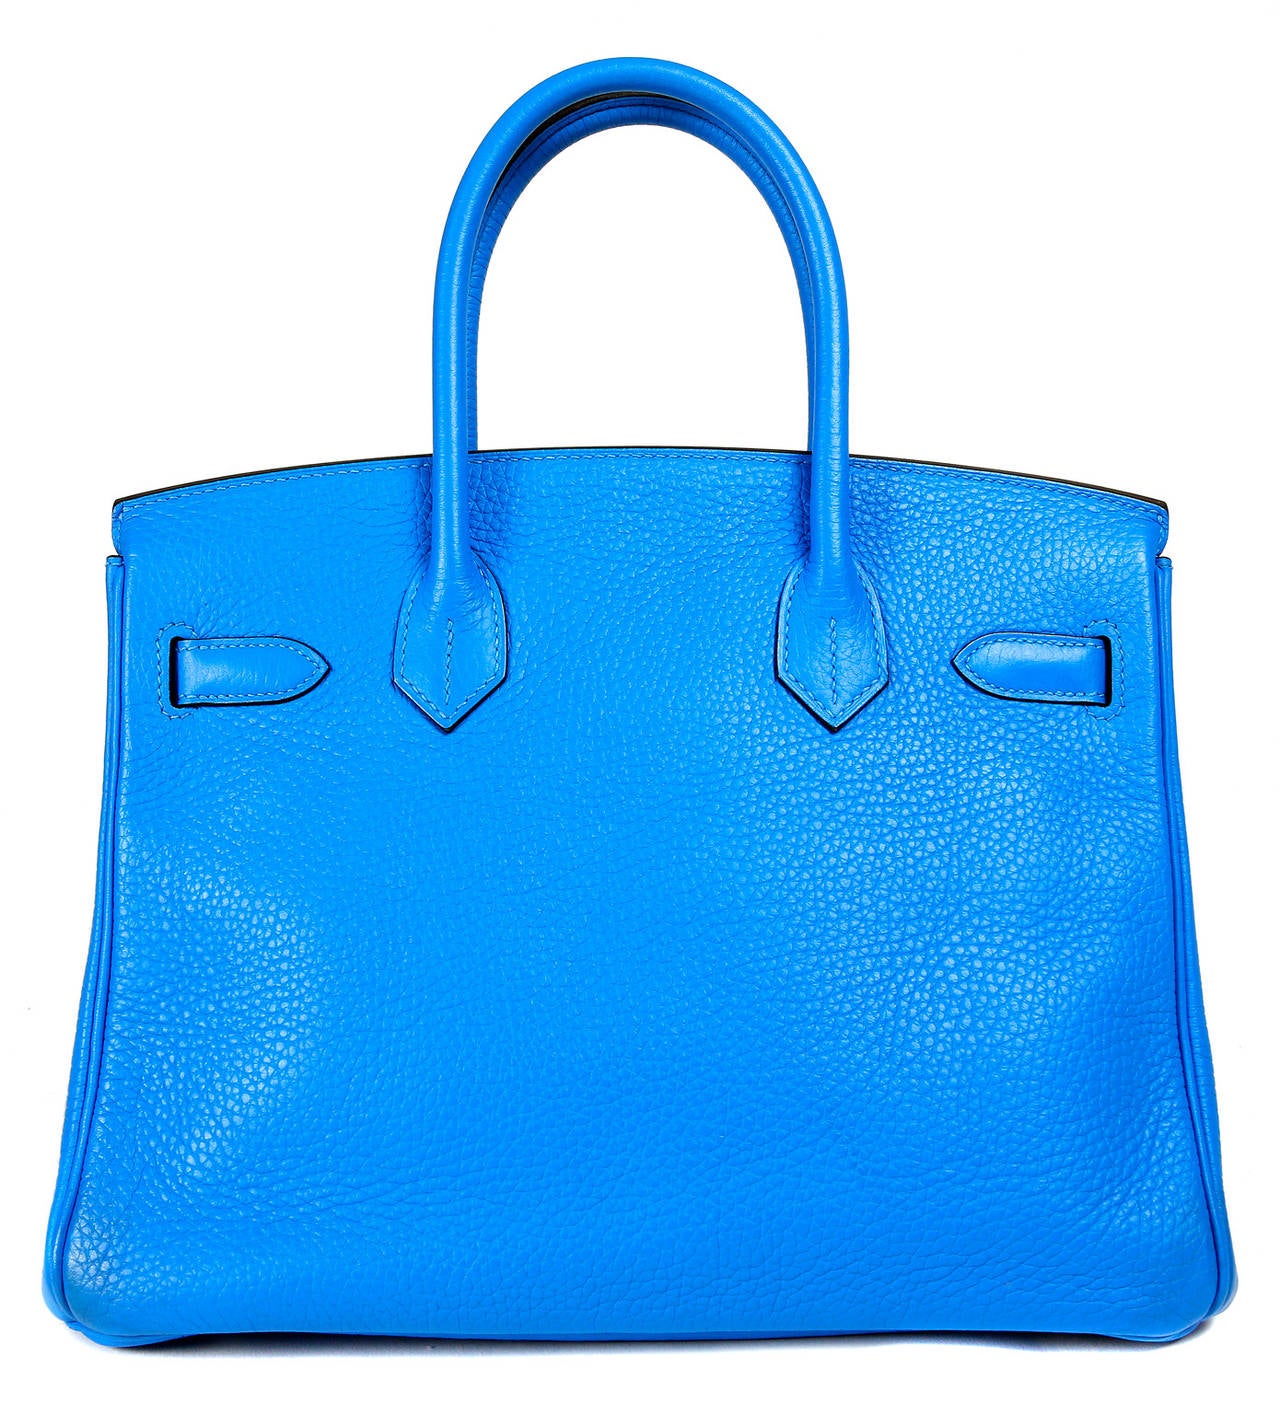 Hermès 30 cm Bleu Hydra Birkin-PRISTINE with the protective plastic intact on much of the hardware.  
 Considered the ultimate luxury item the world over and hand stitched by skilled craftsmen, wait lists for the Birkin often exceed a year or